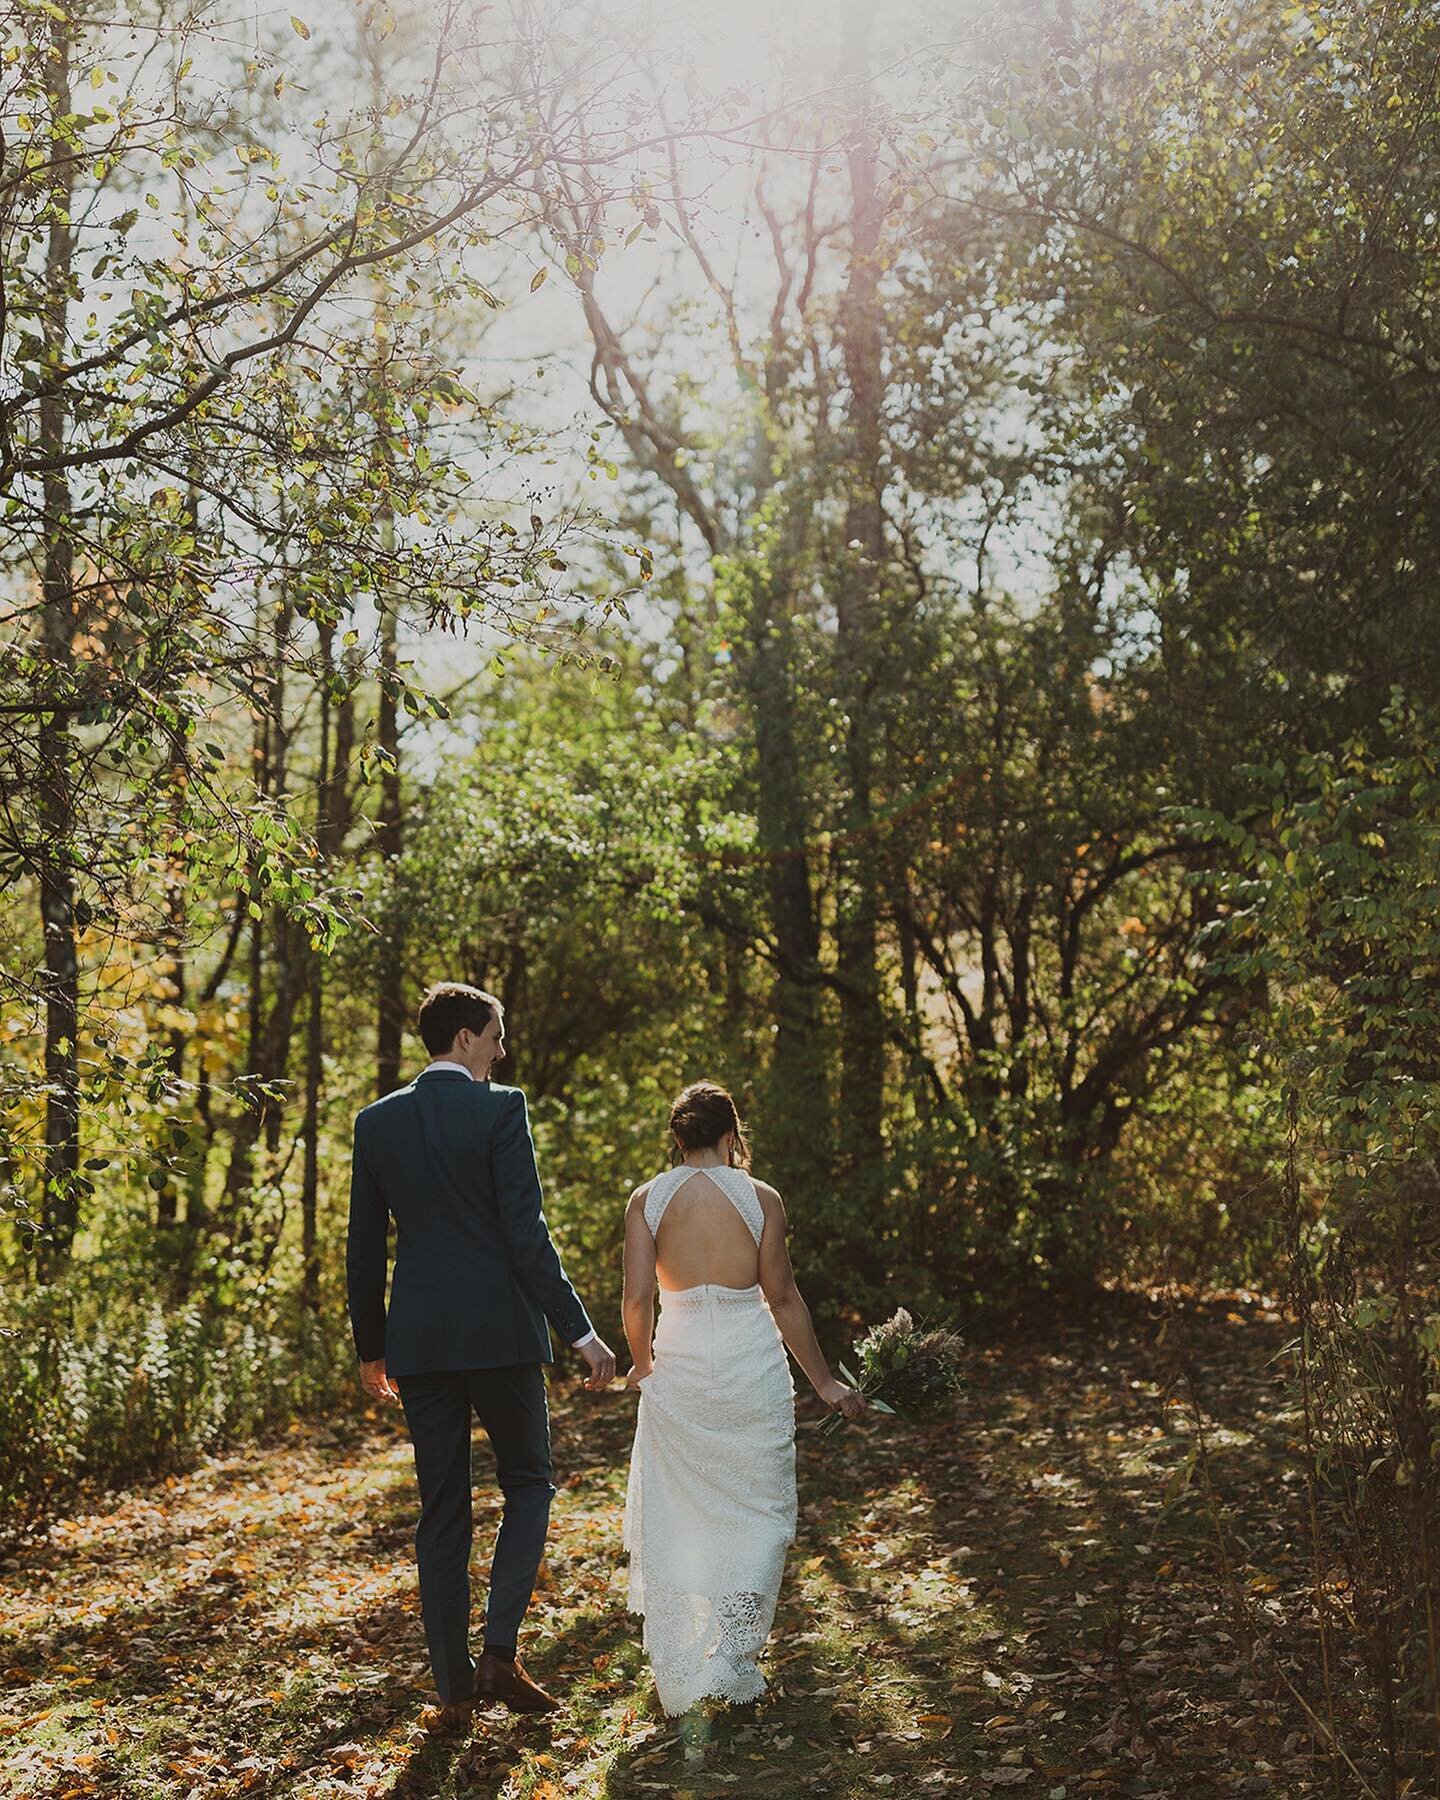 &ldquo;Sometimes the longest way out is the shortest way home.&rdquo; ❤️

Abbie + Zak met in Columbia while traveling and tied the knot on top of a mountain this weekend surrounded by their families. ✨
.
.
.
Venue: Sheep Hill
Dress: Waters
Makeup: Hi